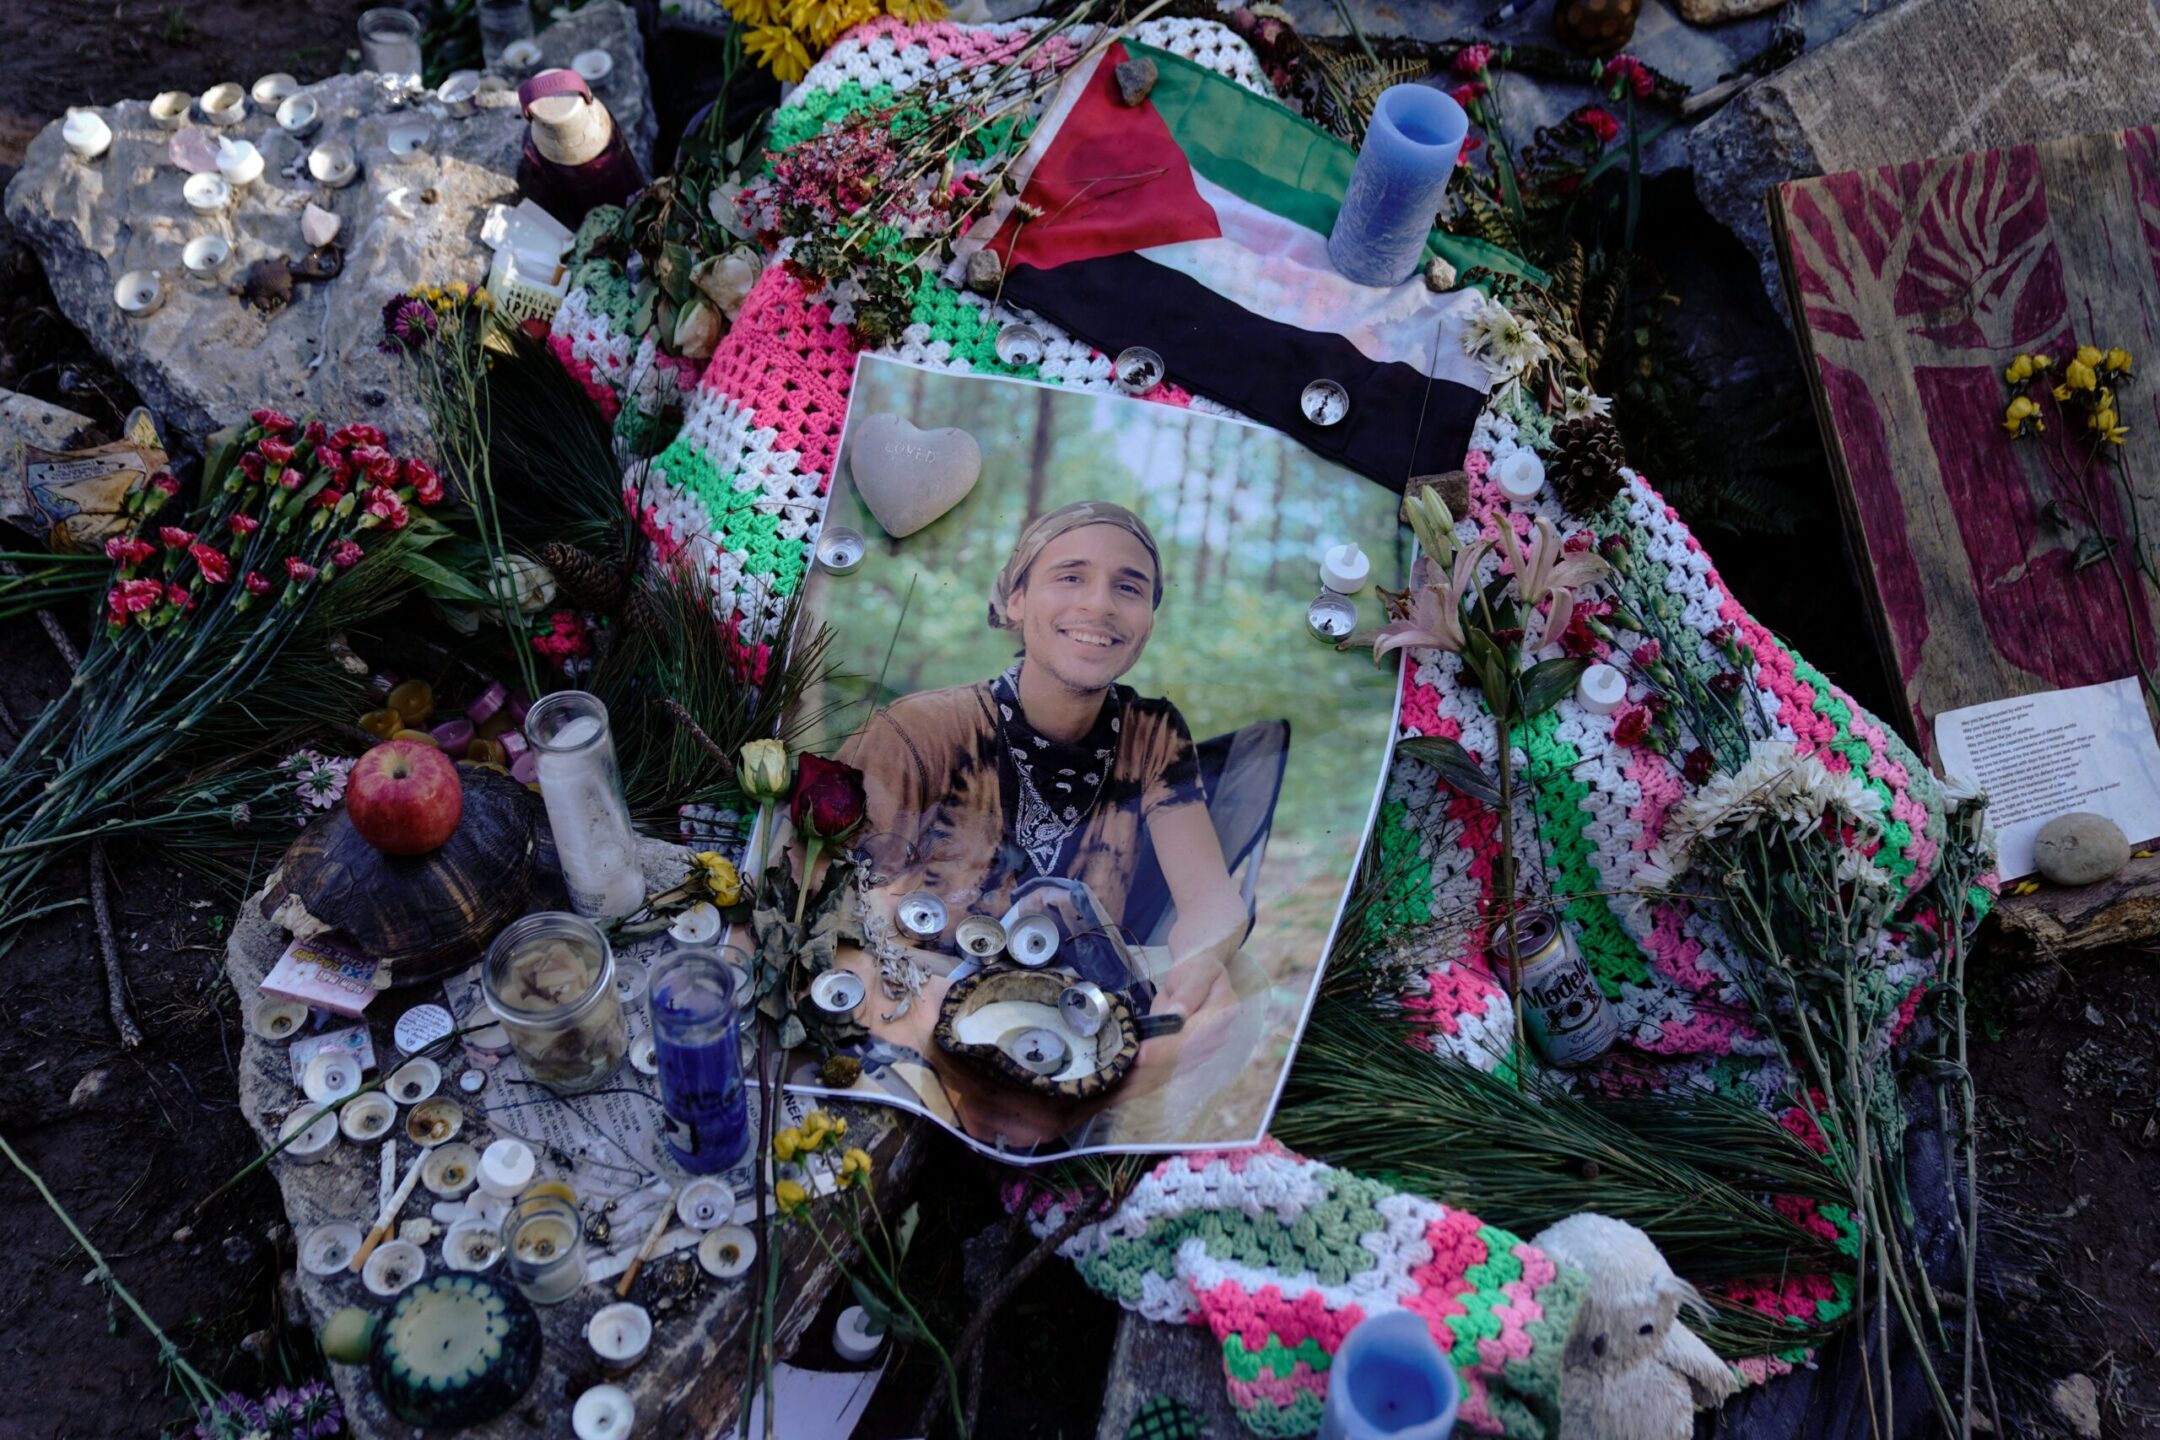 A makeshift memorial for environmental activist Manuel Paez Teran, who was allegedly killed by law enforcement during a raid to clear the construction site of a police training facility that activists have nicknamed “Cop City” near Atlanta, Georgia, as seen Feb. 6, 2023. (Cheney Orr/AFP via Getty Images)